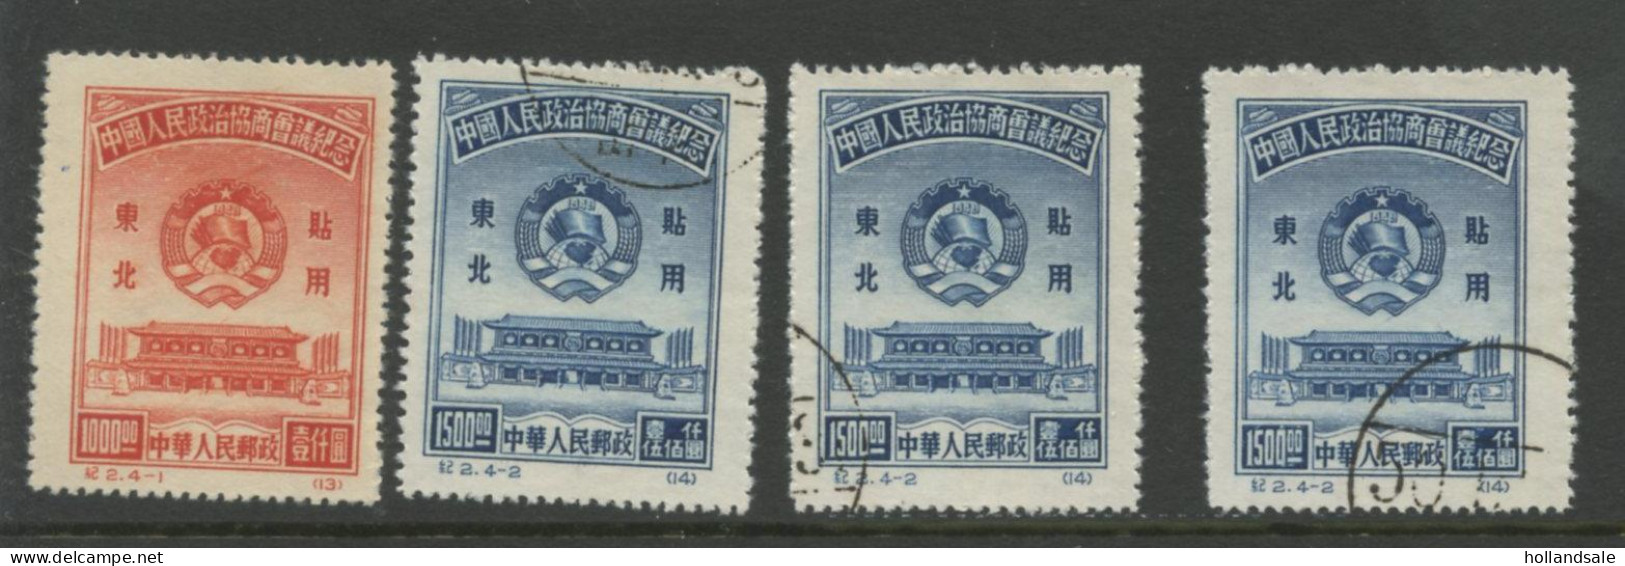 CHINA NORTH-EAST - MICHEL 158 And 159 II (reprints).  158 Unused, Others Used. - China Del Nordeste 1946-48